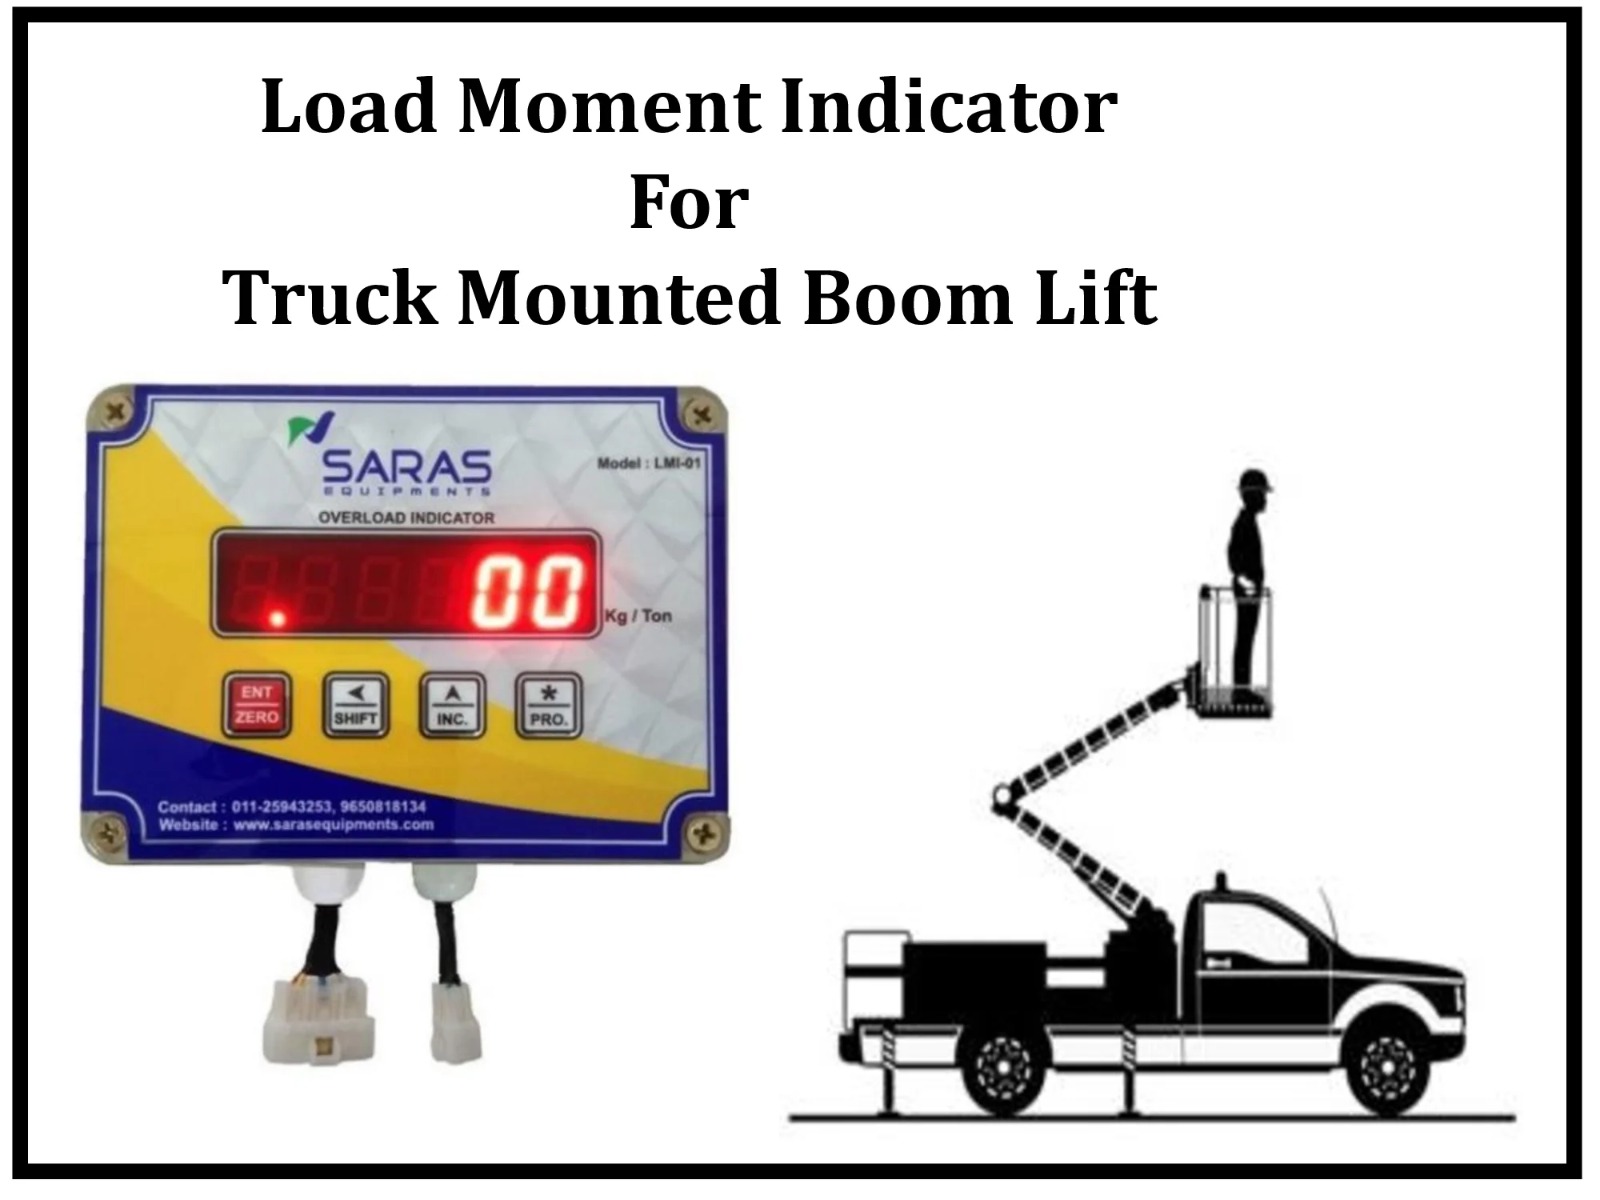 Load Moment Indicator for Truck Mounted Boom Lift